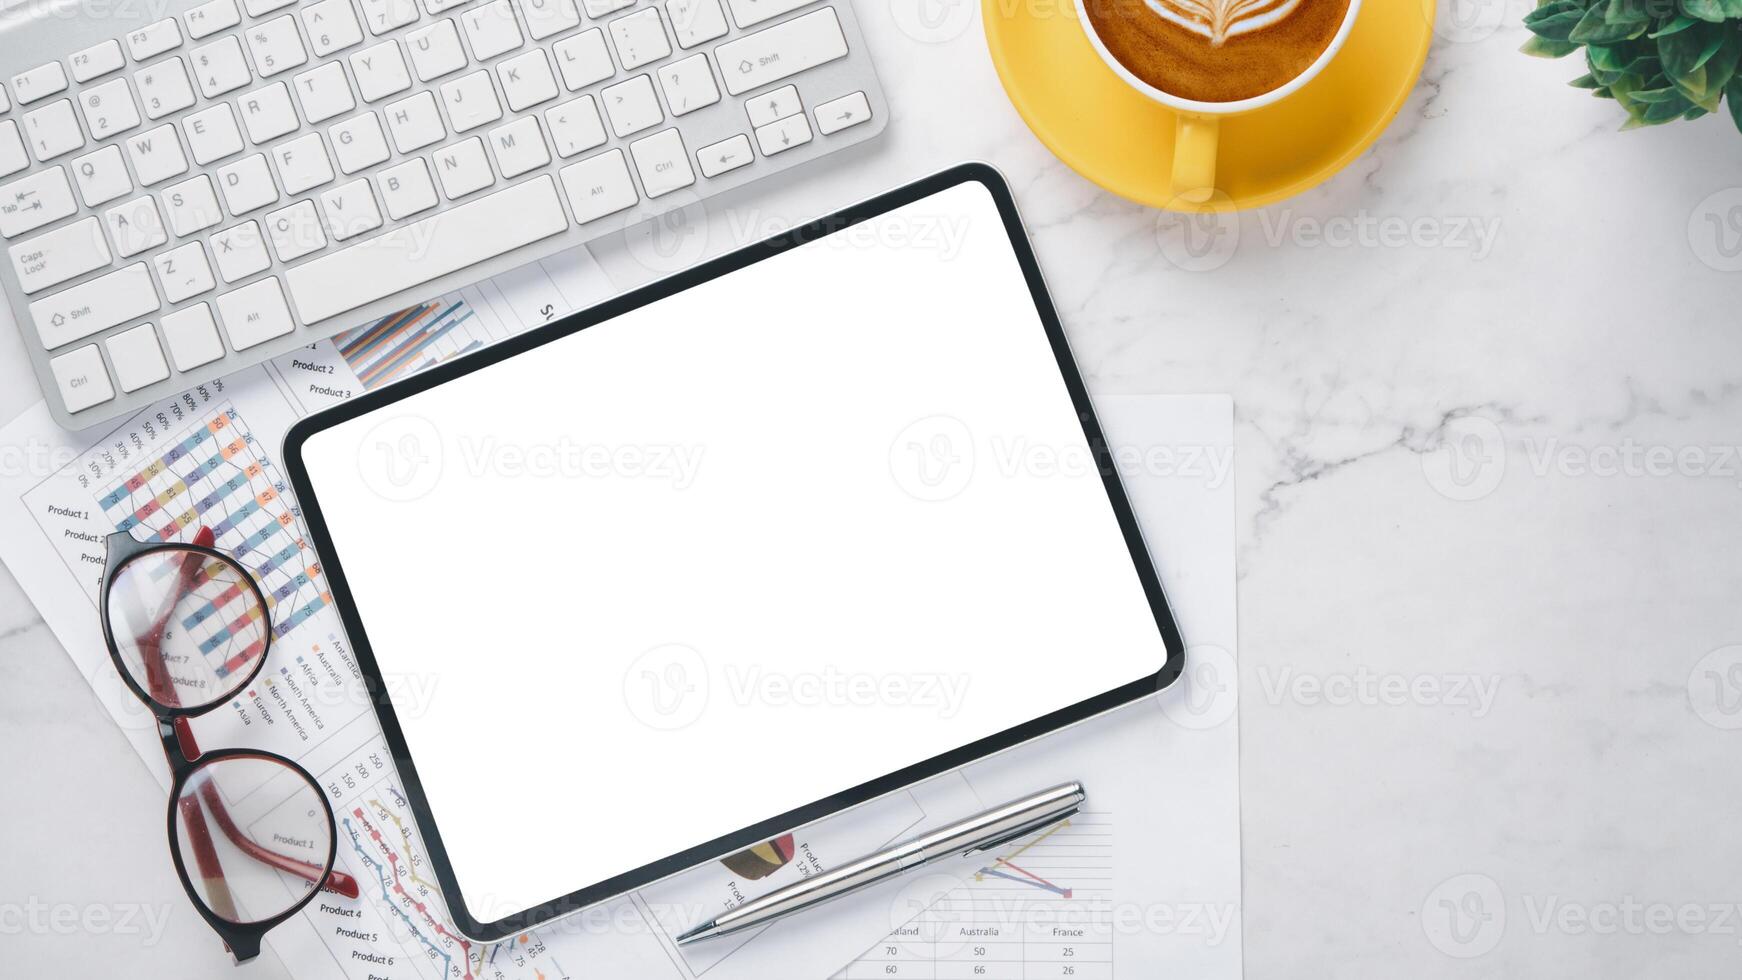 A blank tablet screen on a marble desk with a keyboard, coffee cup, glasses, and business charts, ready for productivity. photo